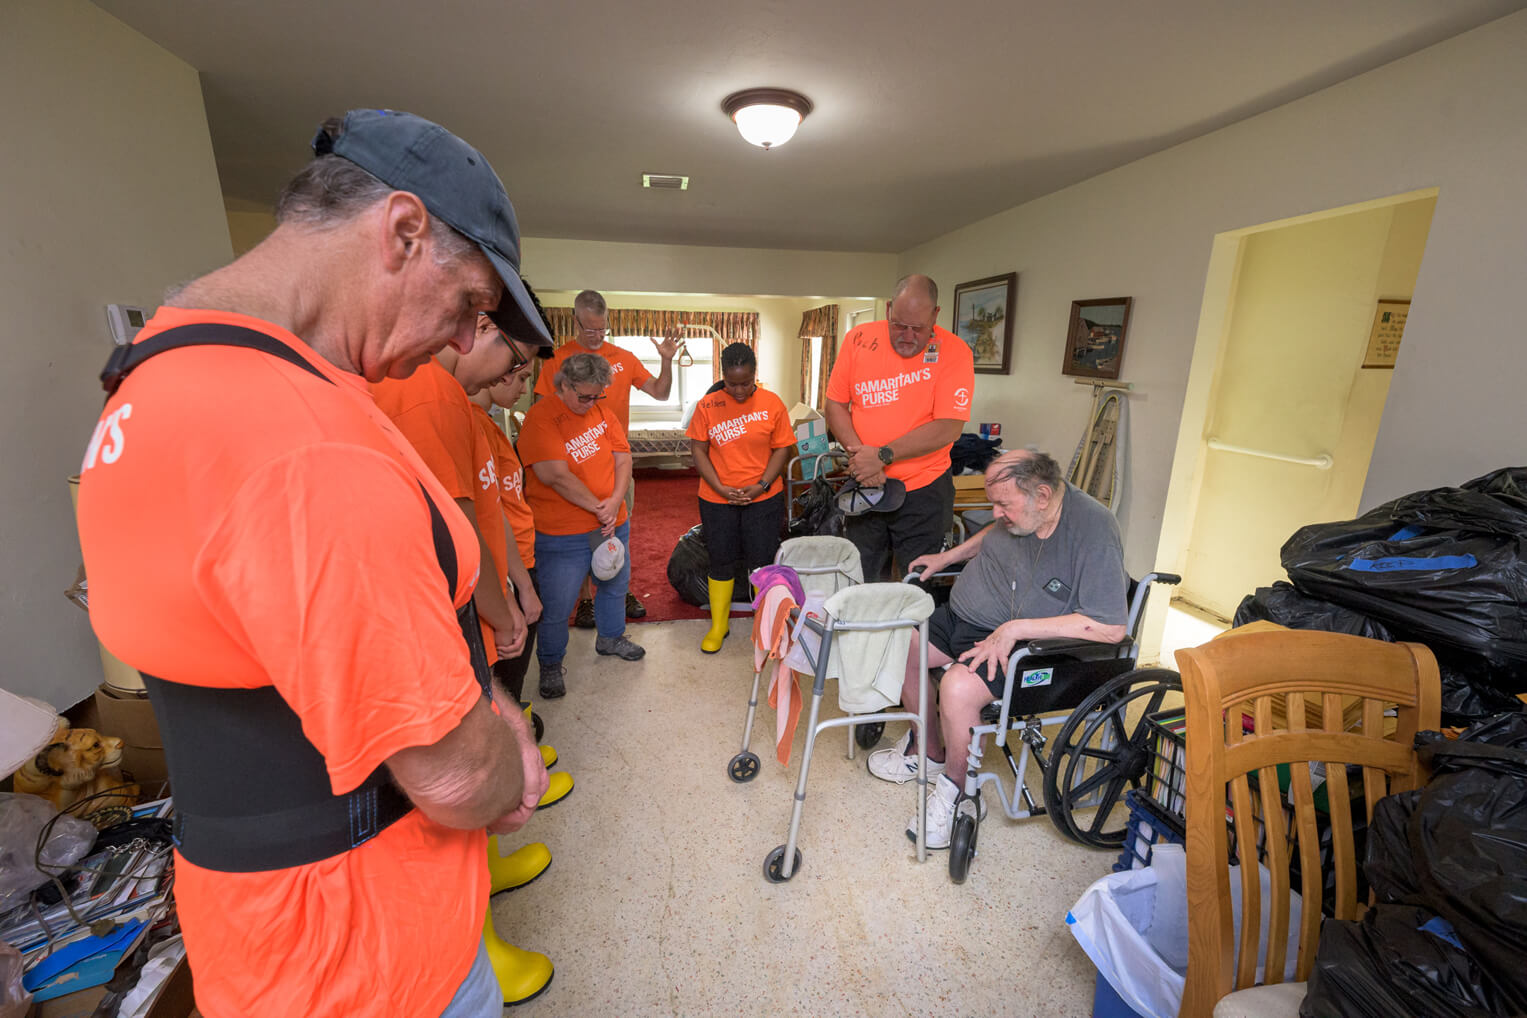 Samaritan's Purse volunteers took the time to pray with Paul as they cleaned out his home.